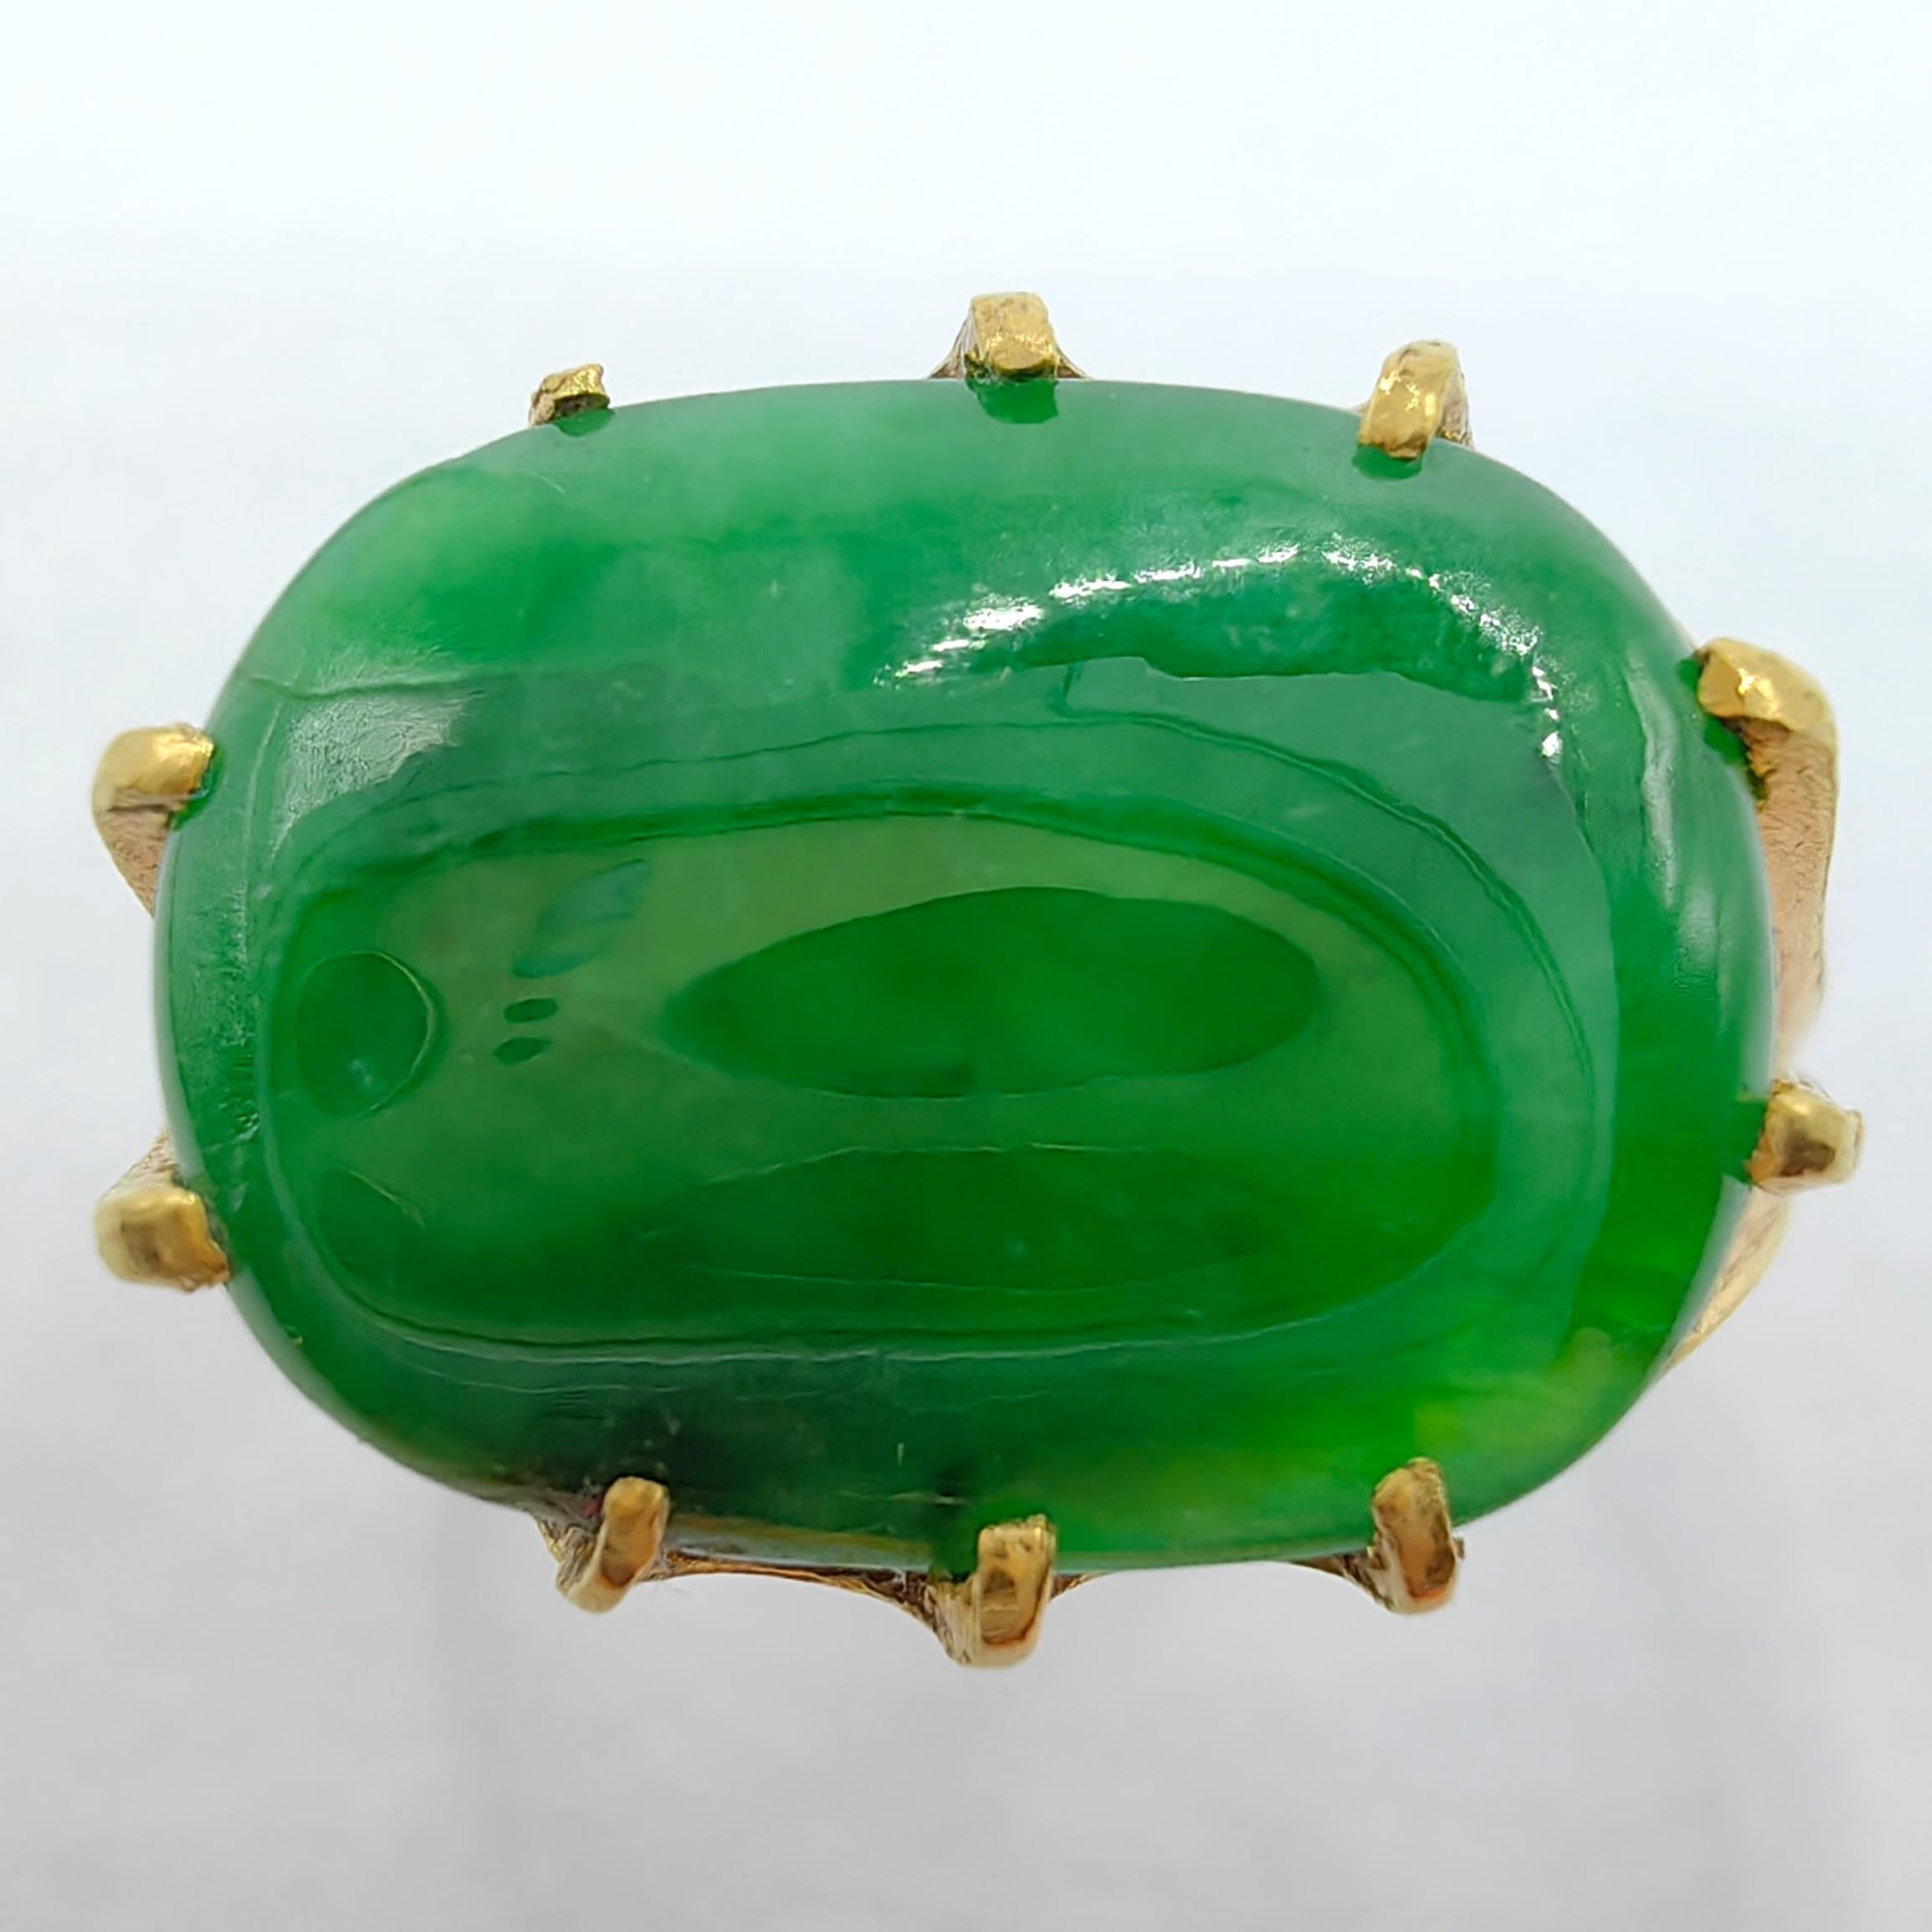 Introducing our exquisite Antique Imperial Green Cabochon Jadeite Jade 24K Yellow Gold Pinky Finger Ring, a true testament to timeless beauty and craftsmanship.

At the center of this remarkable ring sits a stunning cabochon Imperial Green Jadeite